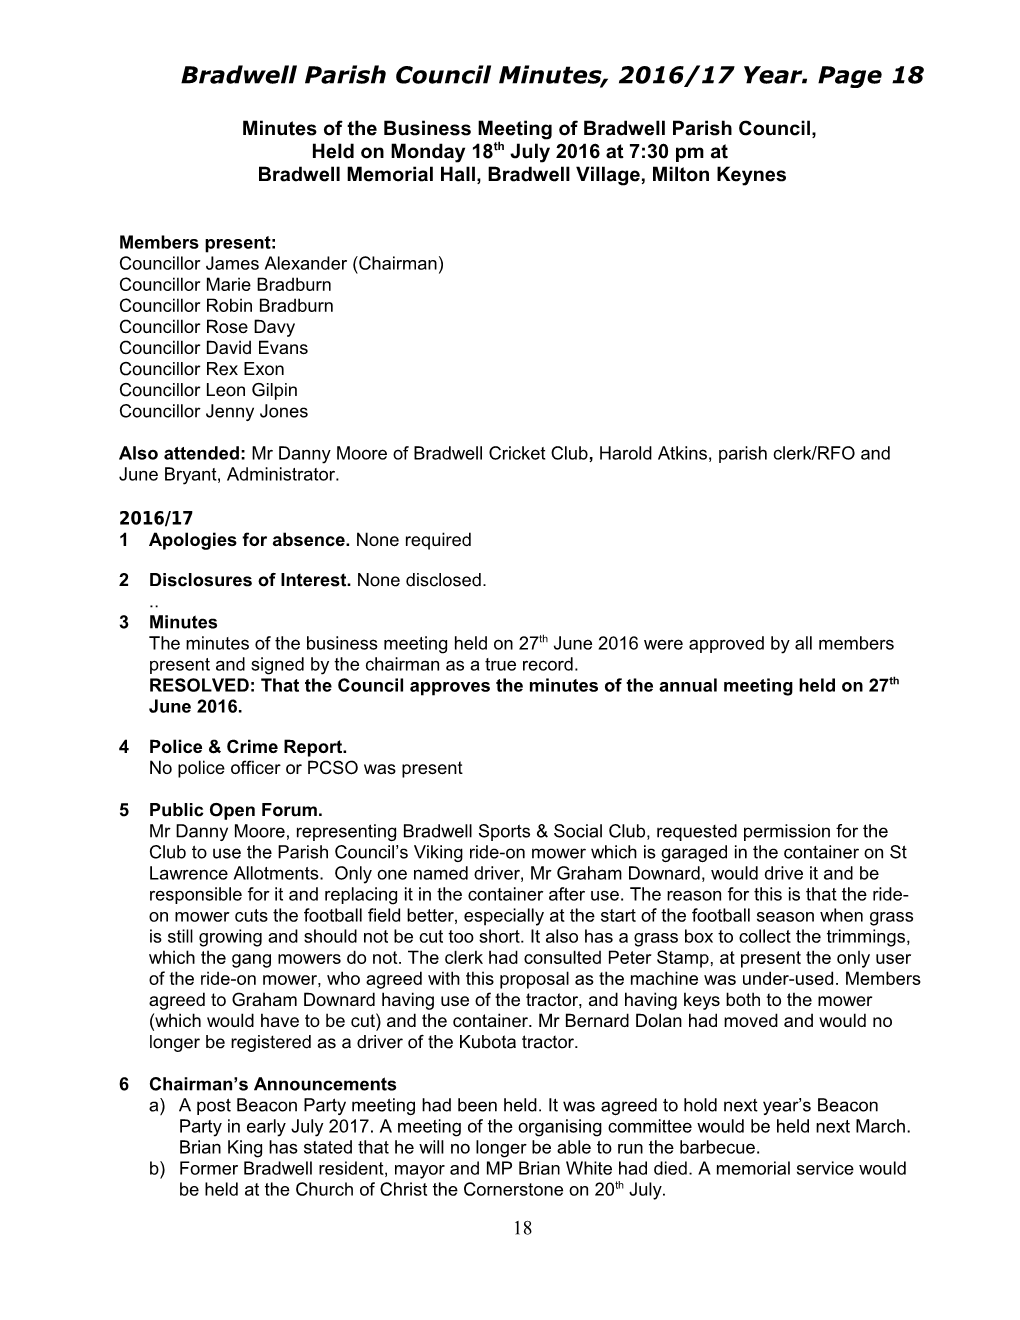 Minutes of the Full Bradwell Parish Council Meeting Held on Monday 16Th April 2007 At